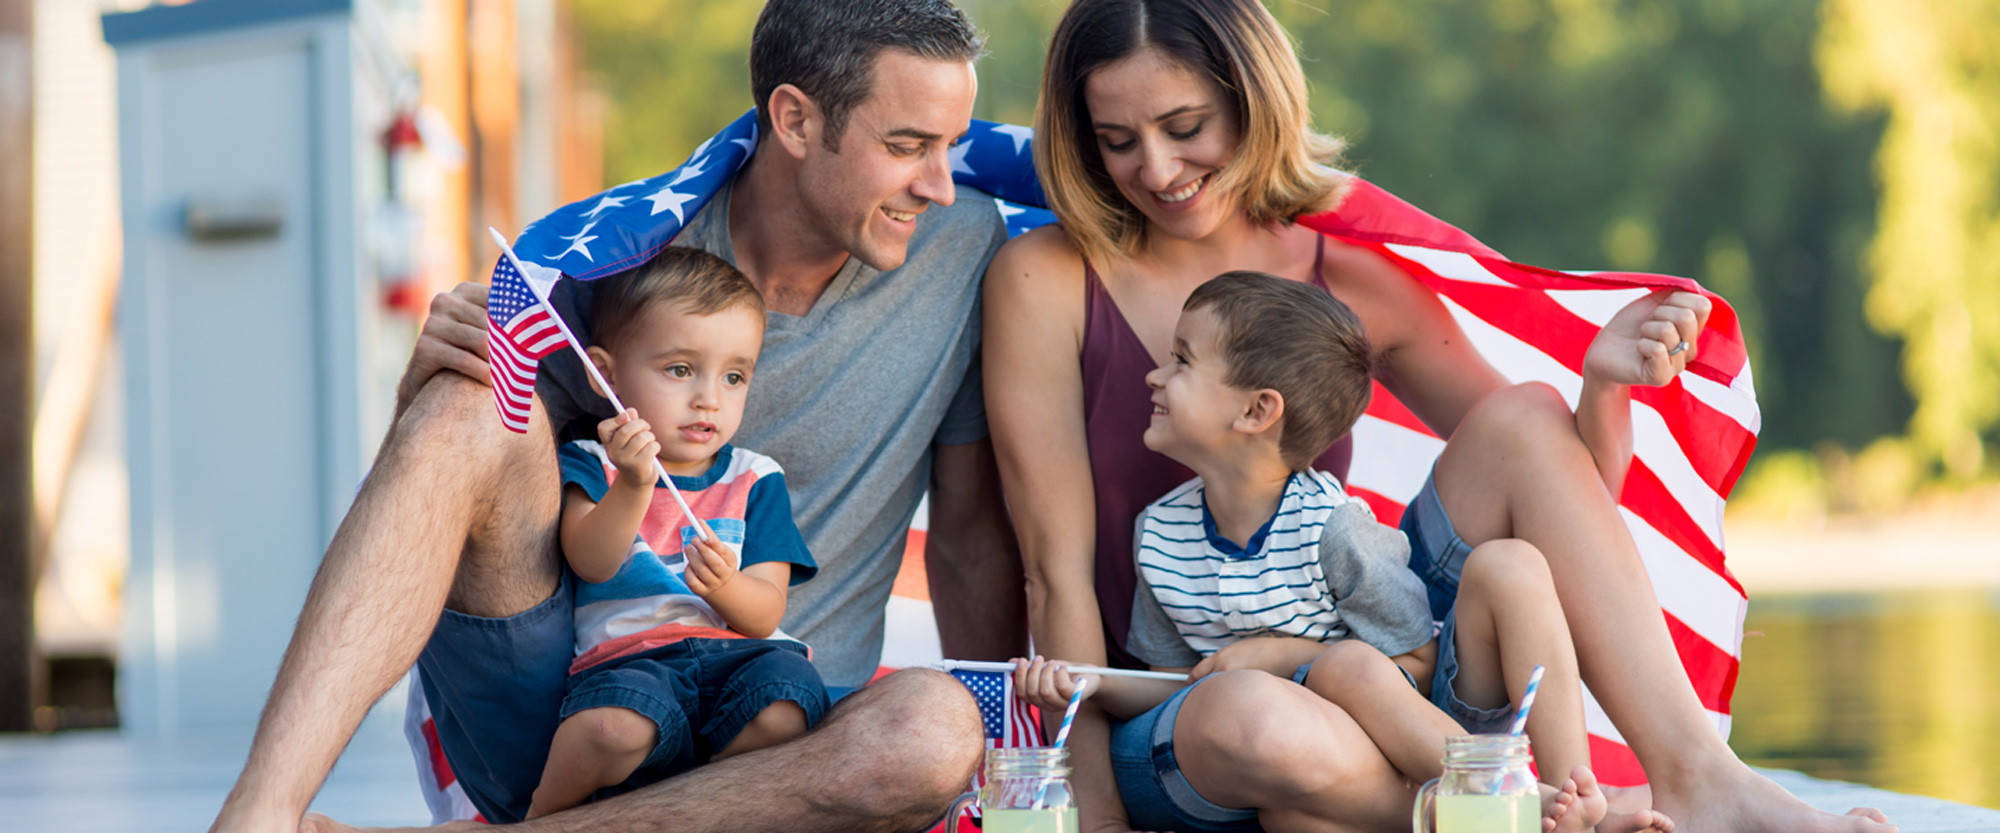 The American flag-themed Happy family